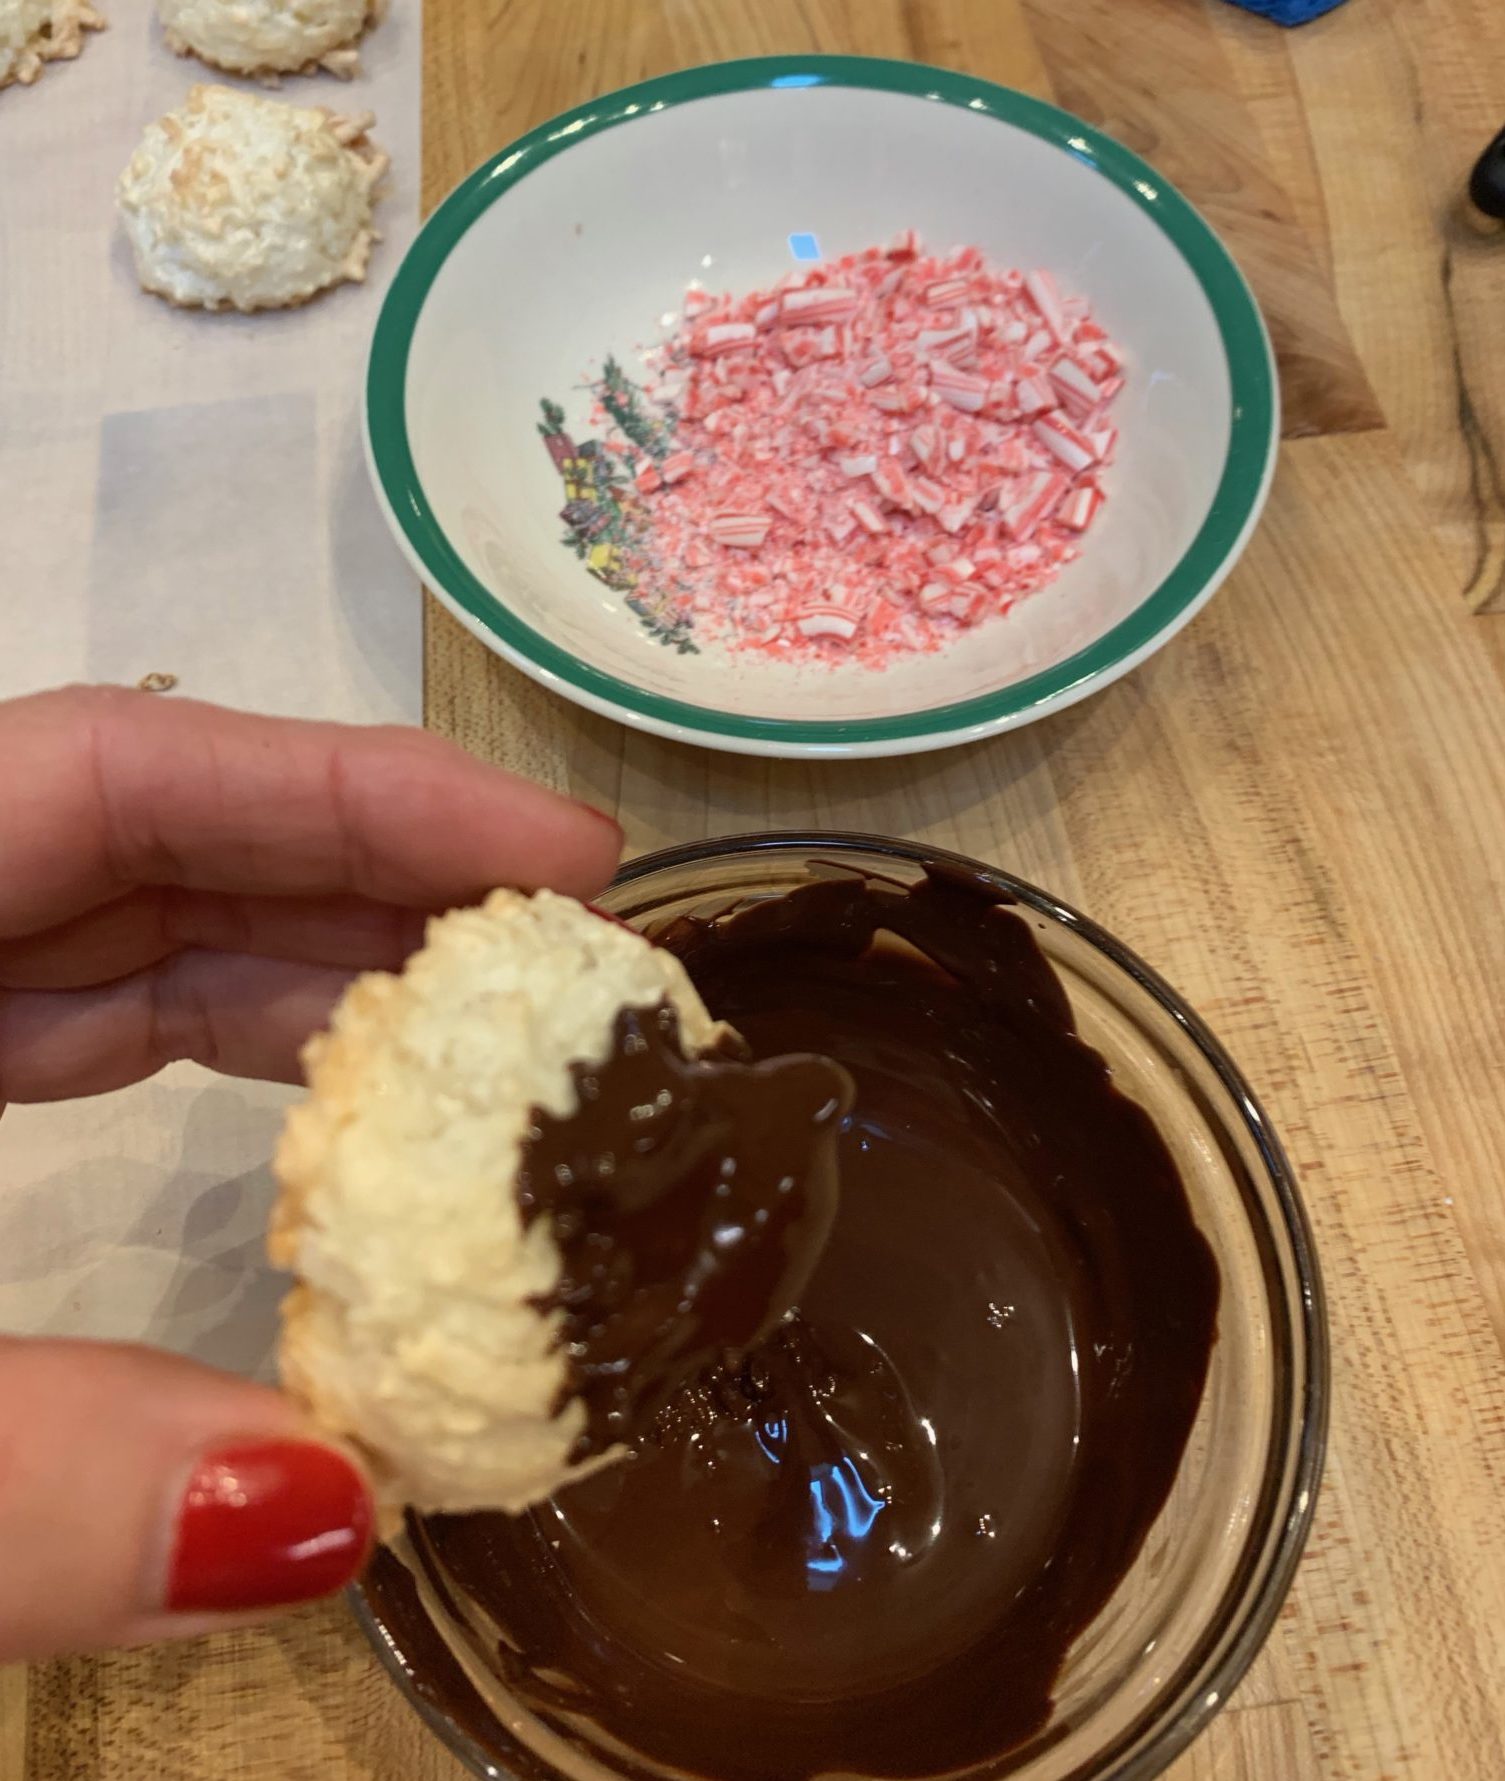 Dipping a macaroon in chocolate